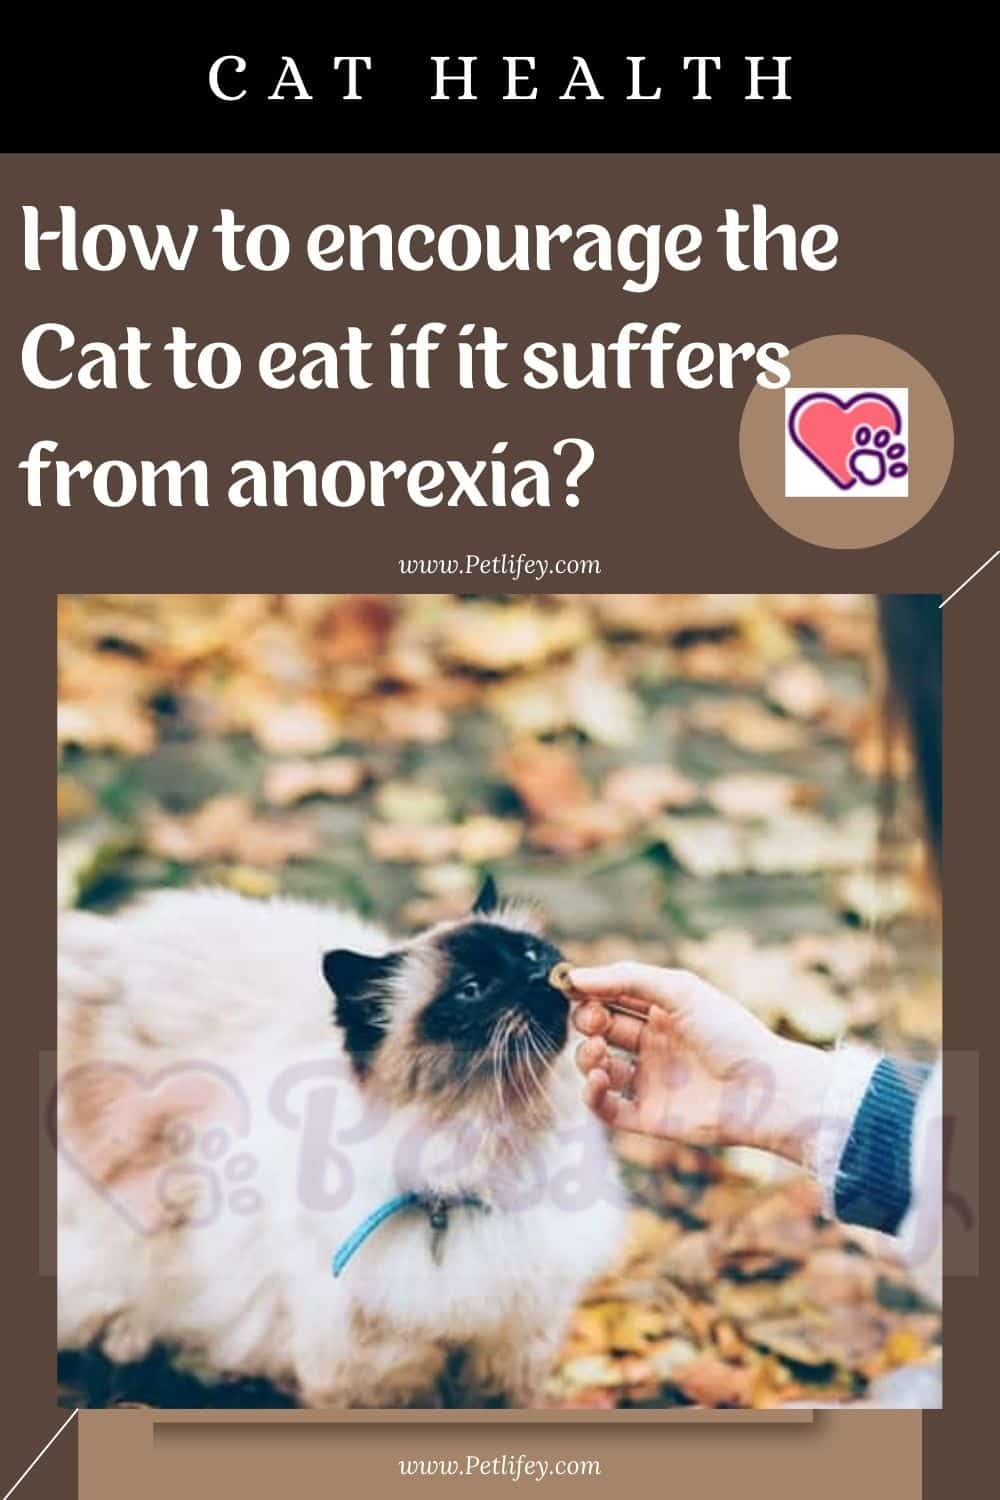 How to encourage the Cat to eat if it suffers from anorexia